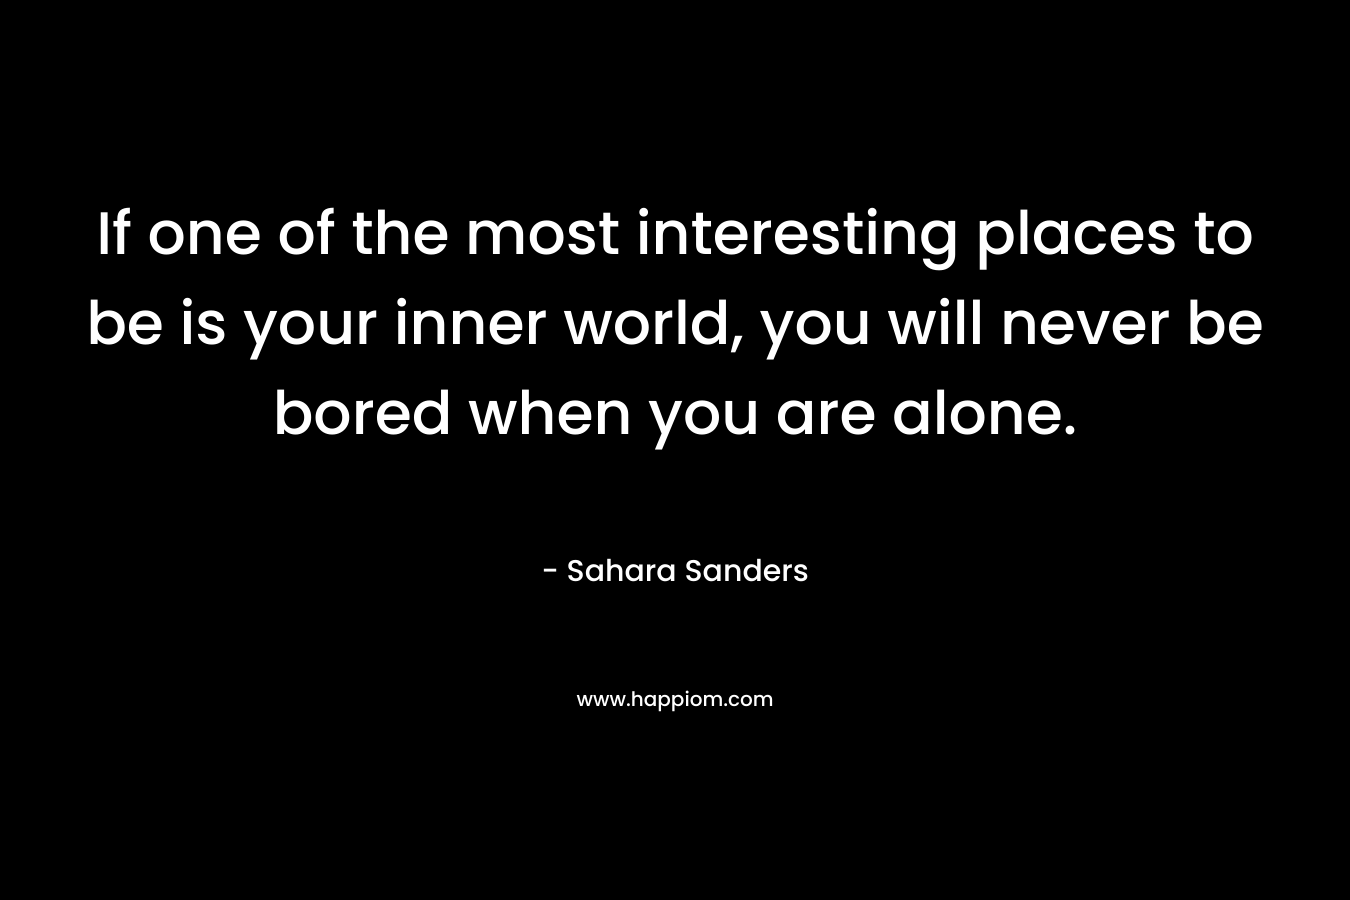 If one of the most interesting places to be is your inner world, you will never be bored when you are alone. – Sahara Sanders